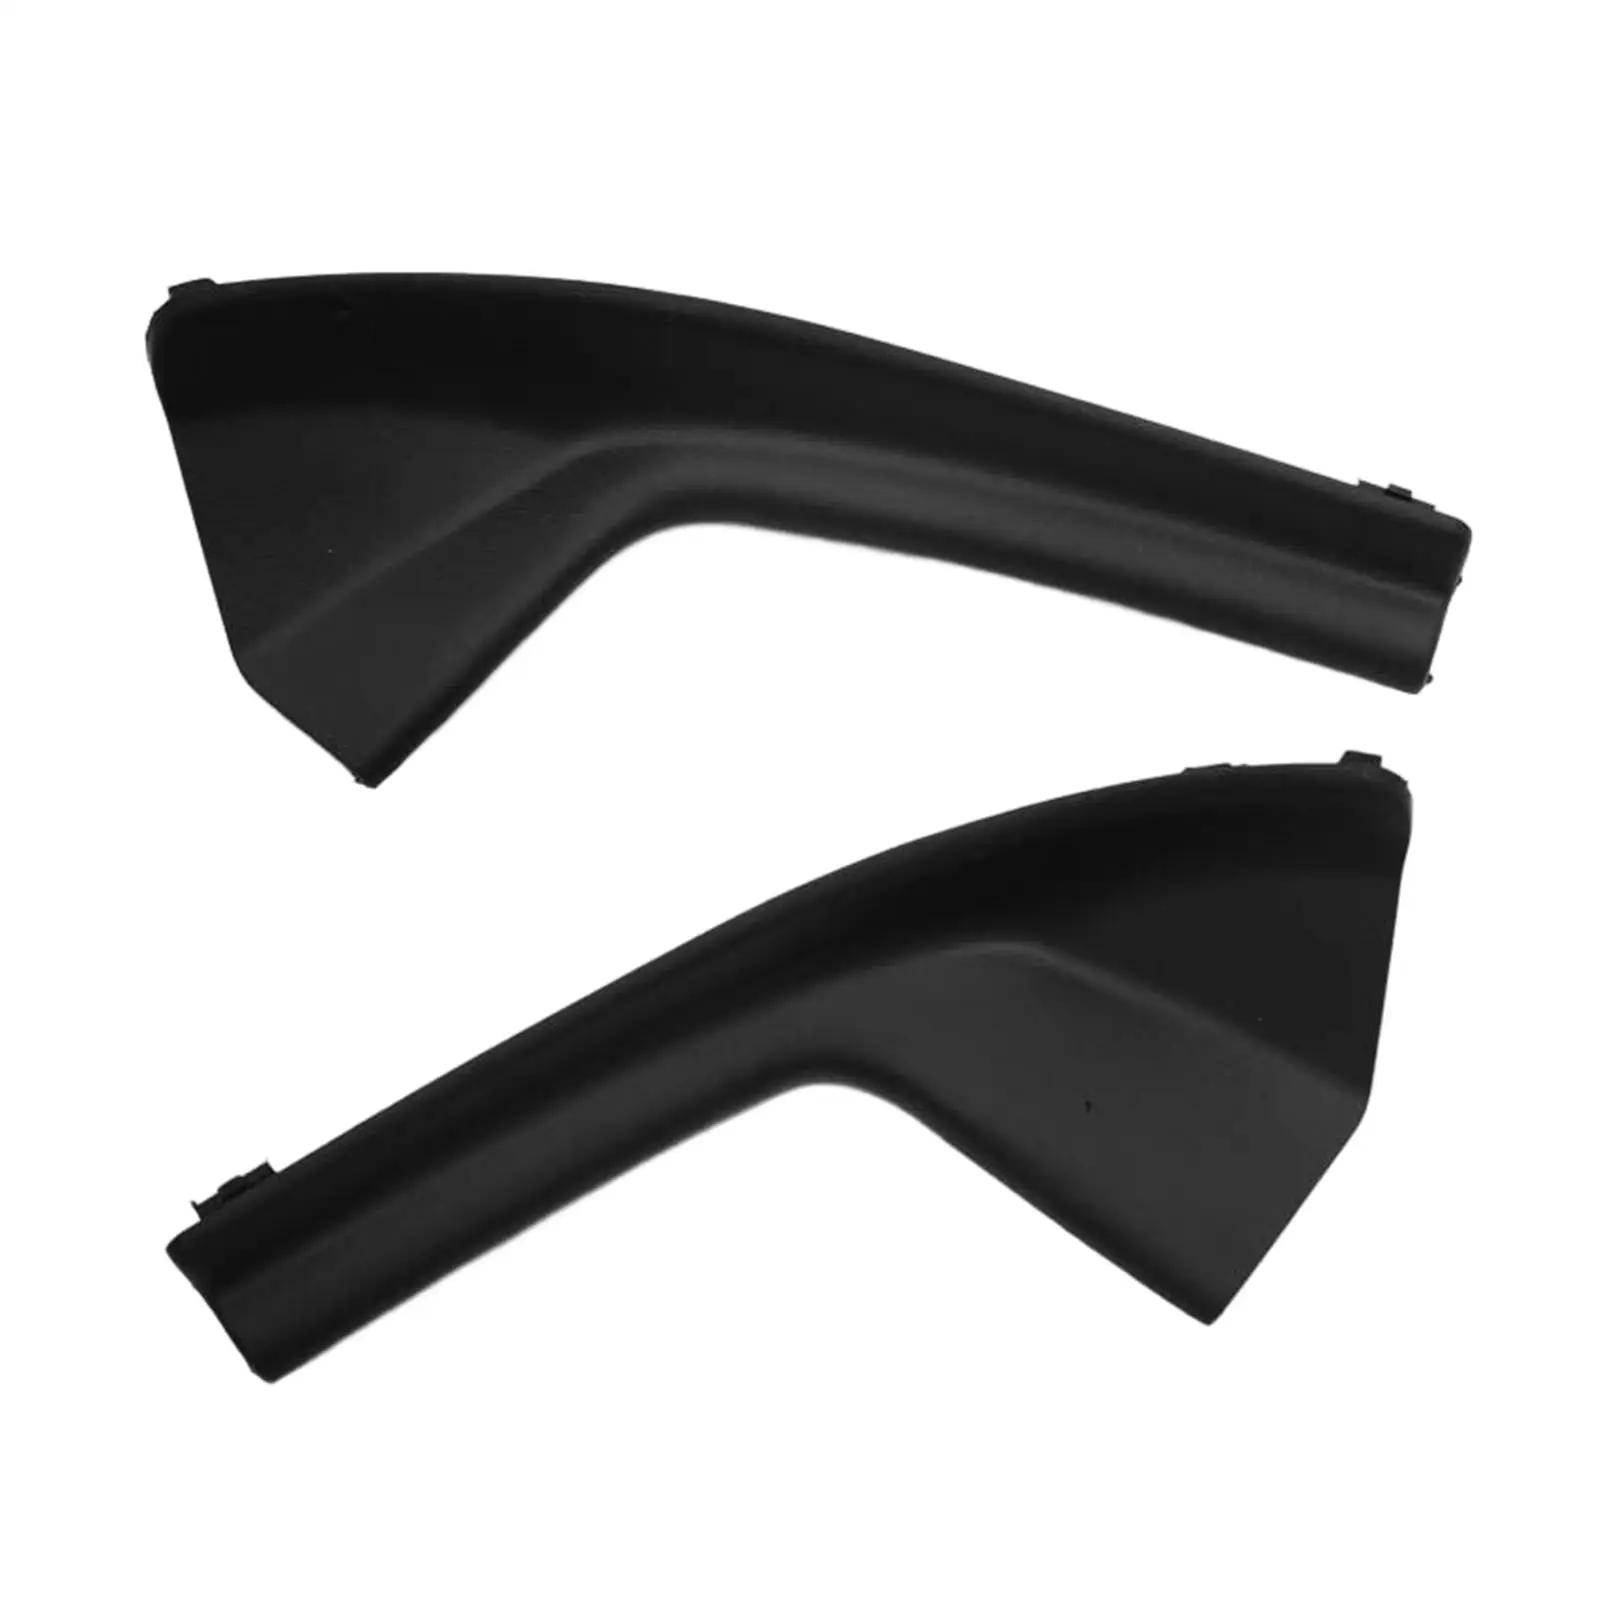 2x Front Windshield Wiper Side Cowl Extension Trim Cover 66895-ed50A 66894-ed500 Left Right Side for Nissan Versa Sedan